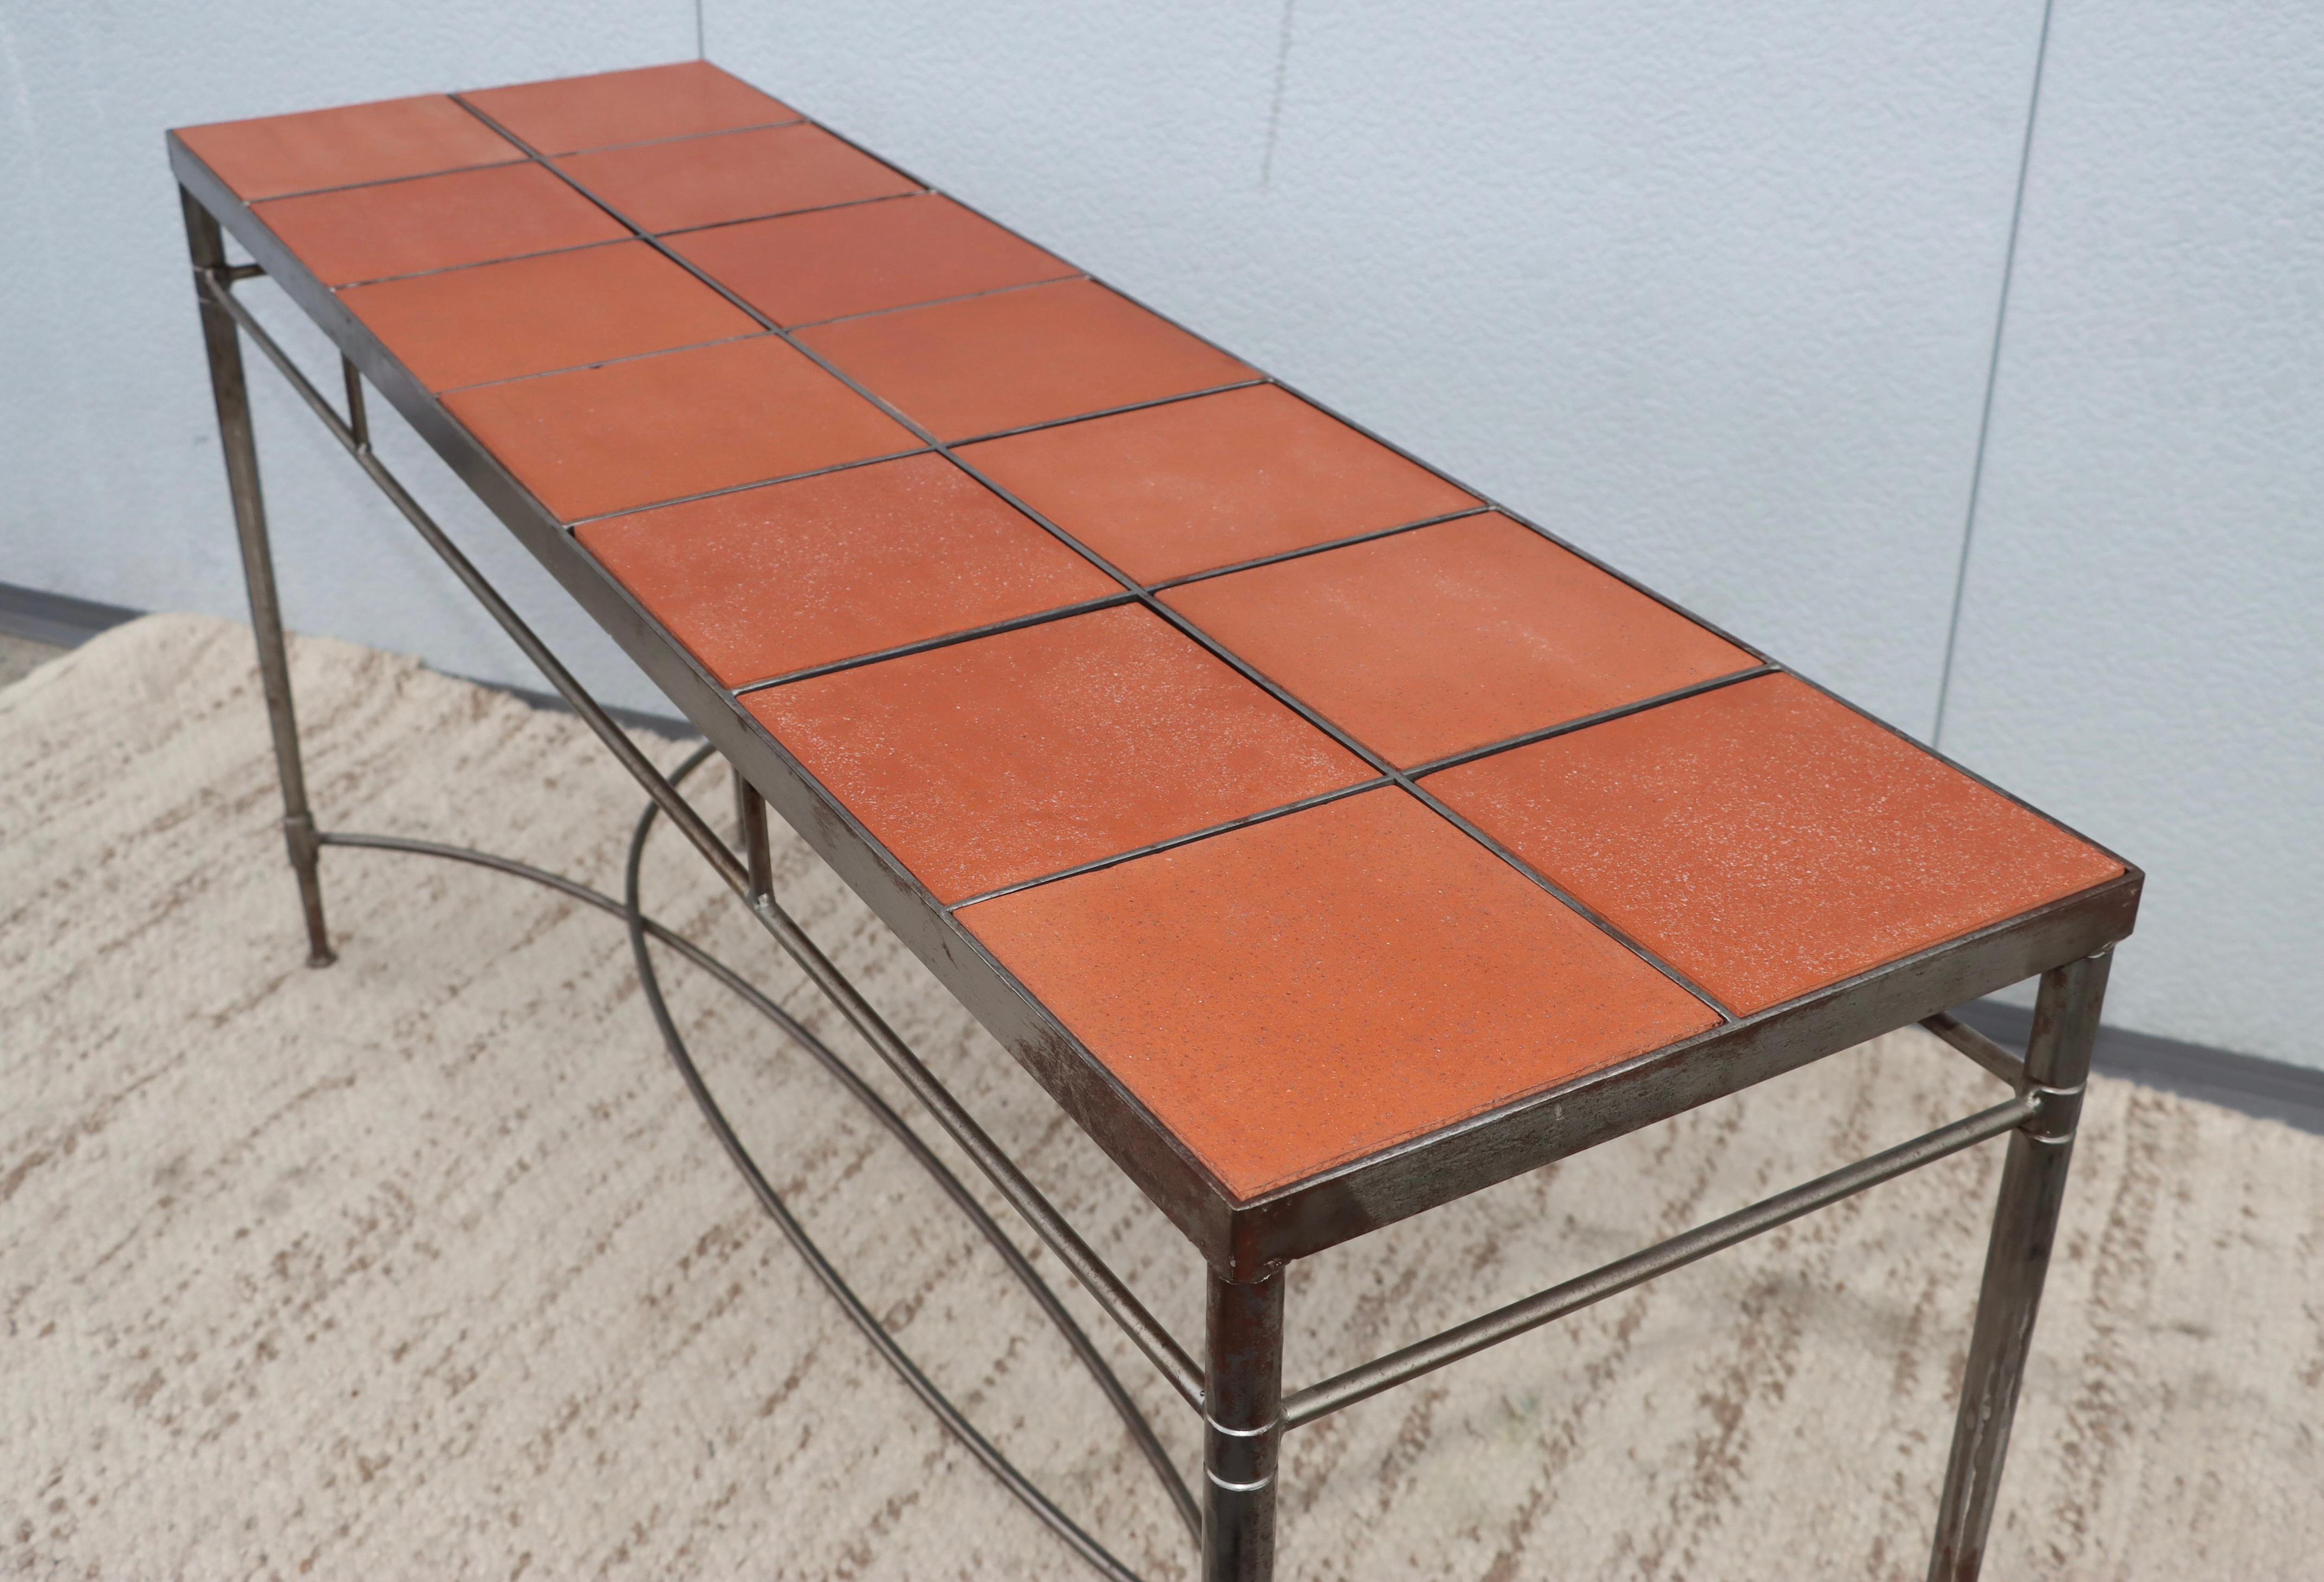 1970's Italian Iron Console Table with Impruneta Terracotta Tile Inserts For Sale 6